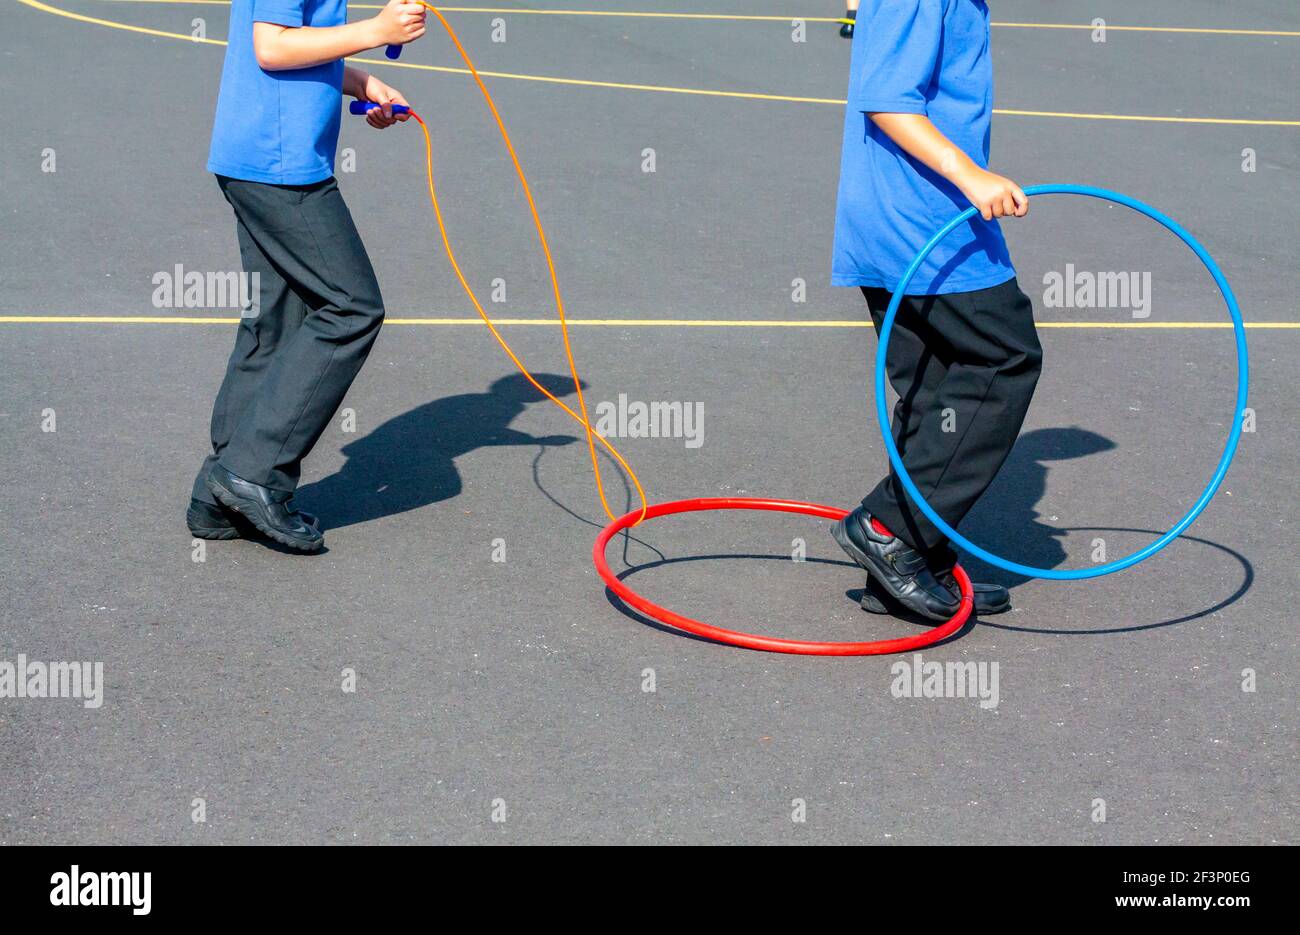 Primary school children playing with hoops outside in a school playground during a break from lessons. Stock Photo